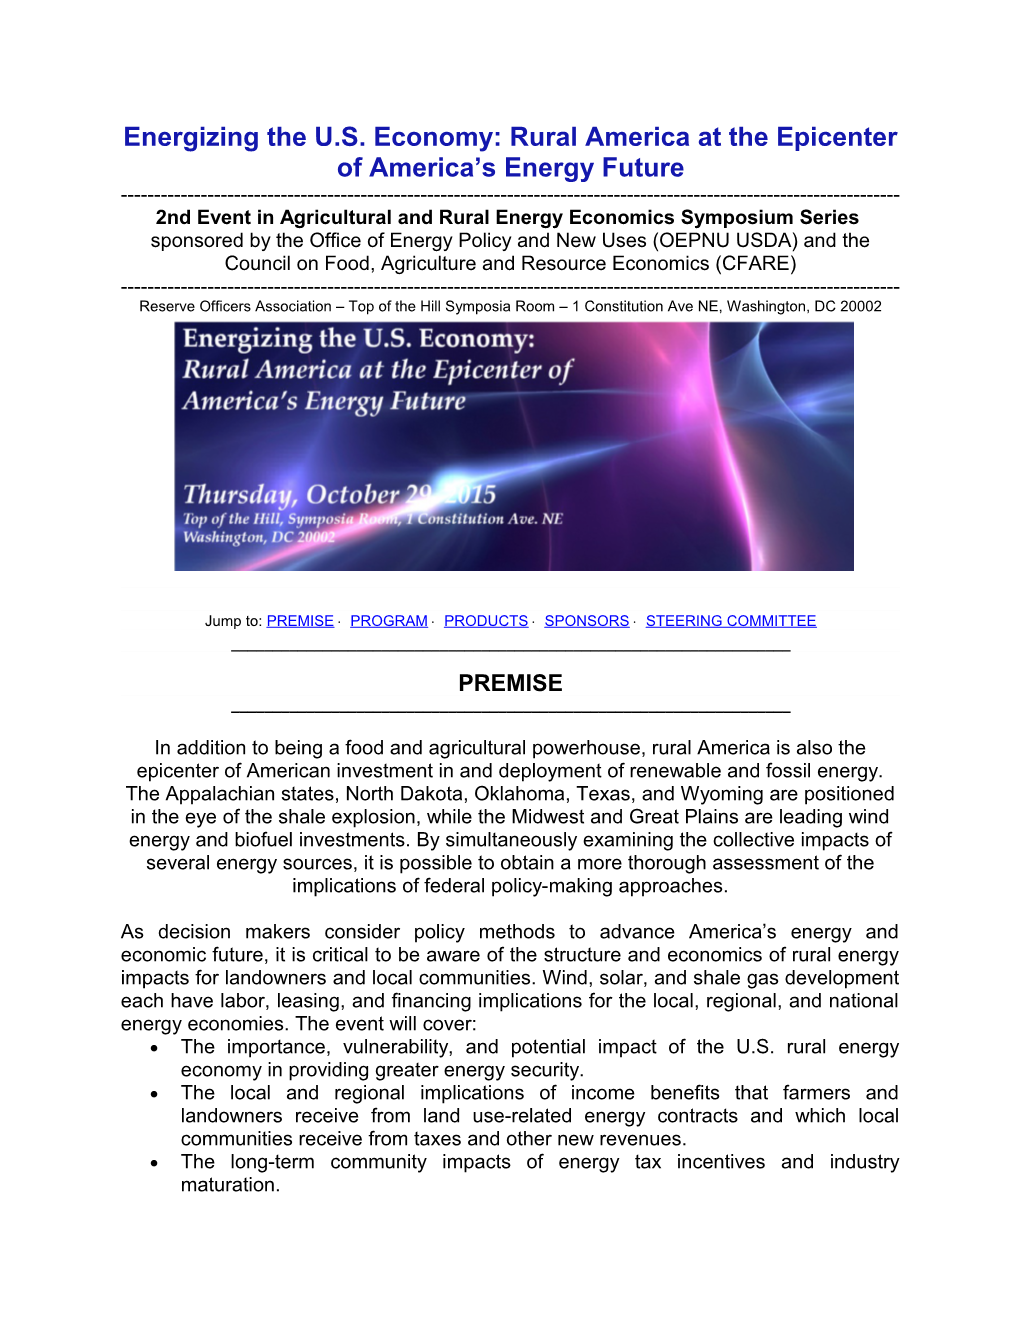 Energizing the U.S. Economy: Rural America at the Epicenter of America S Energy Future